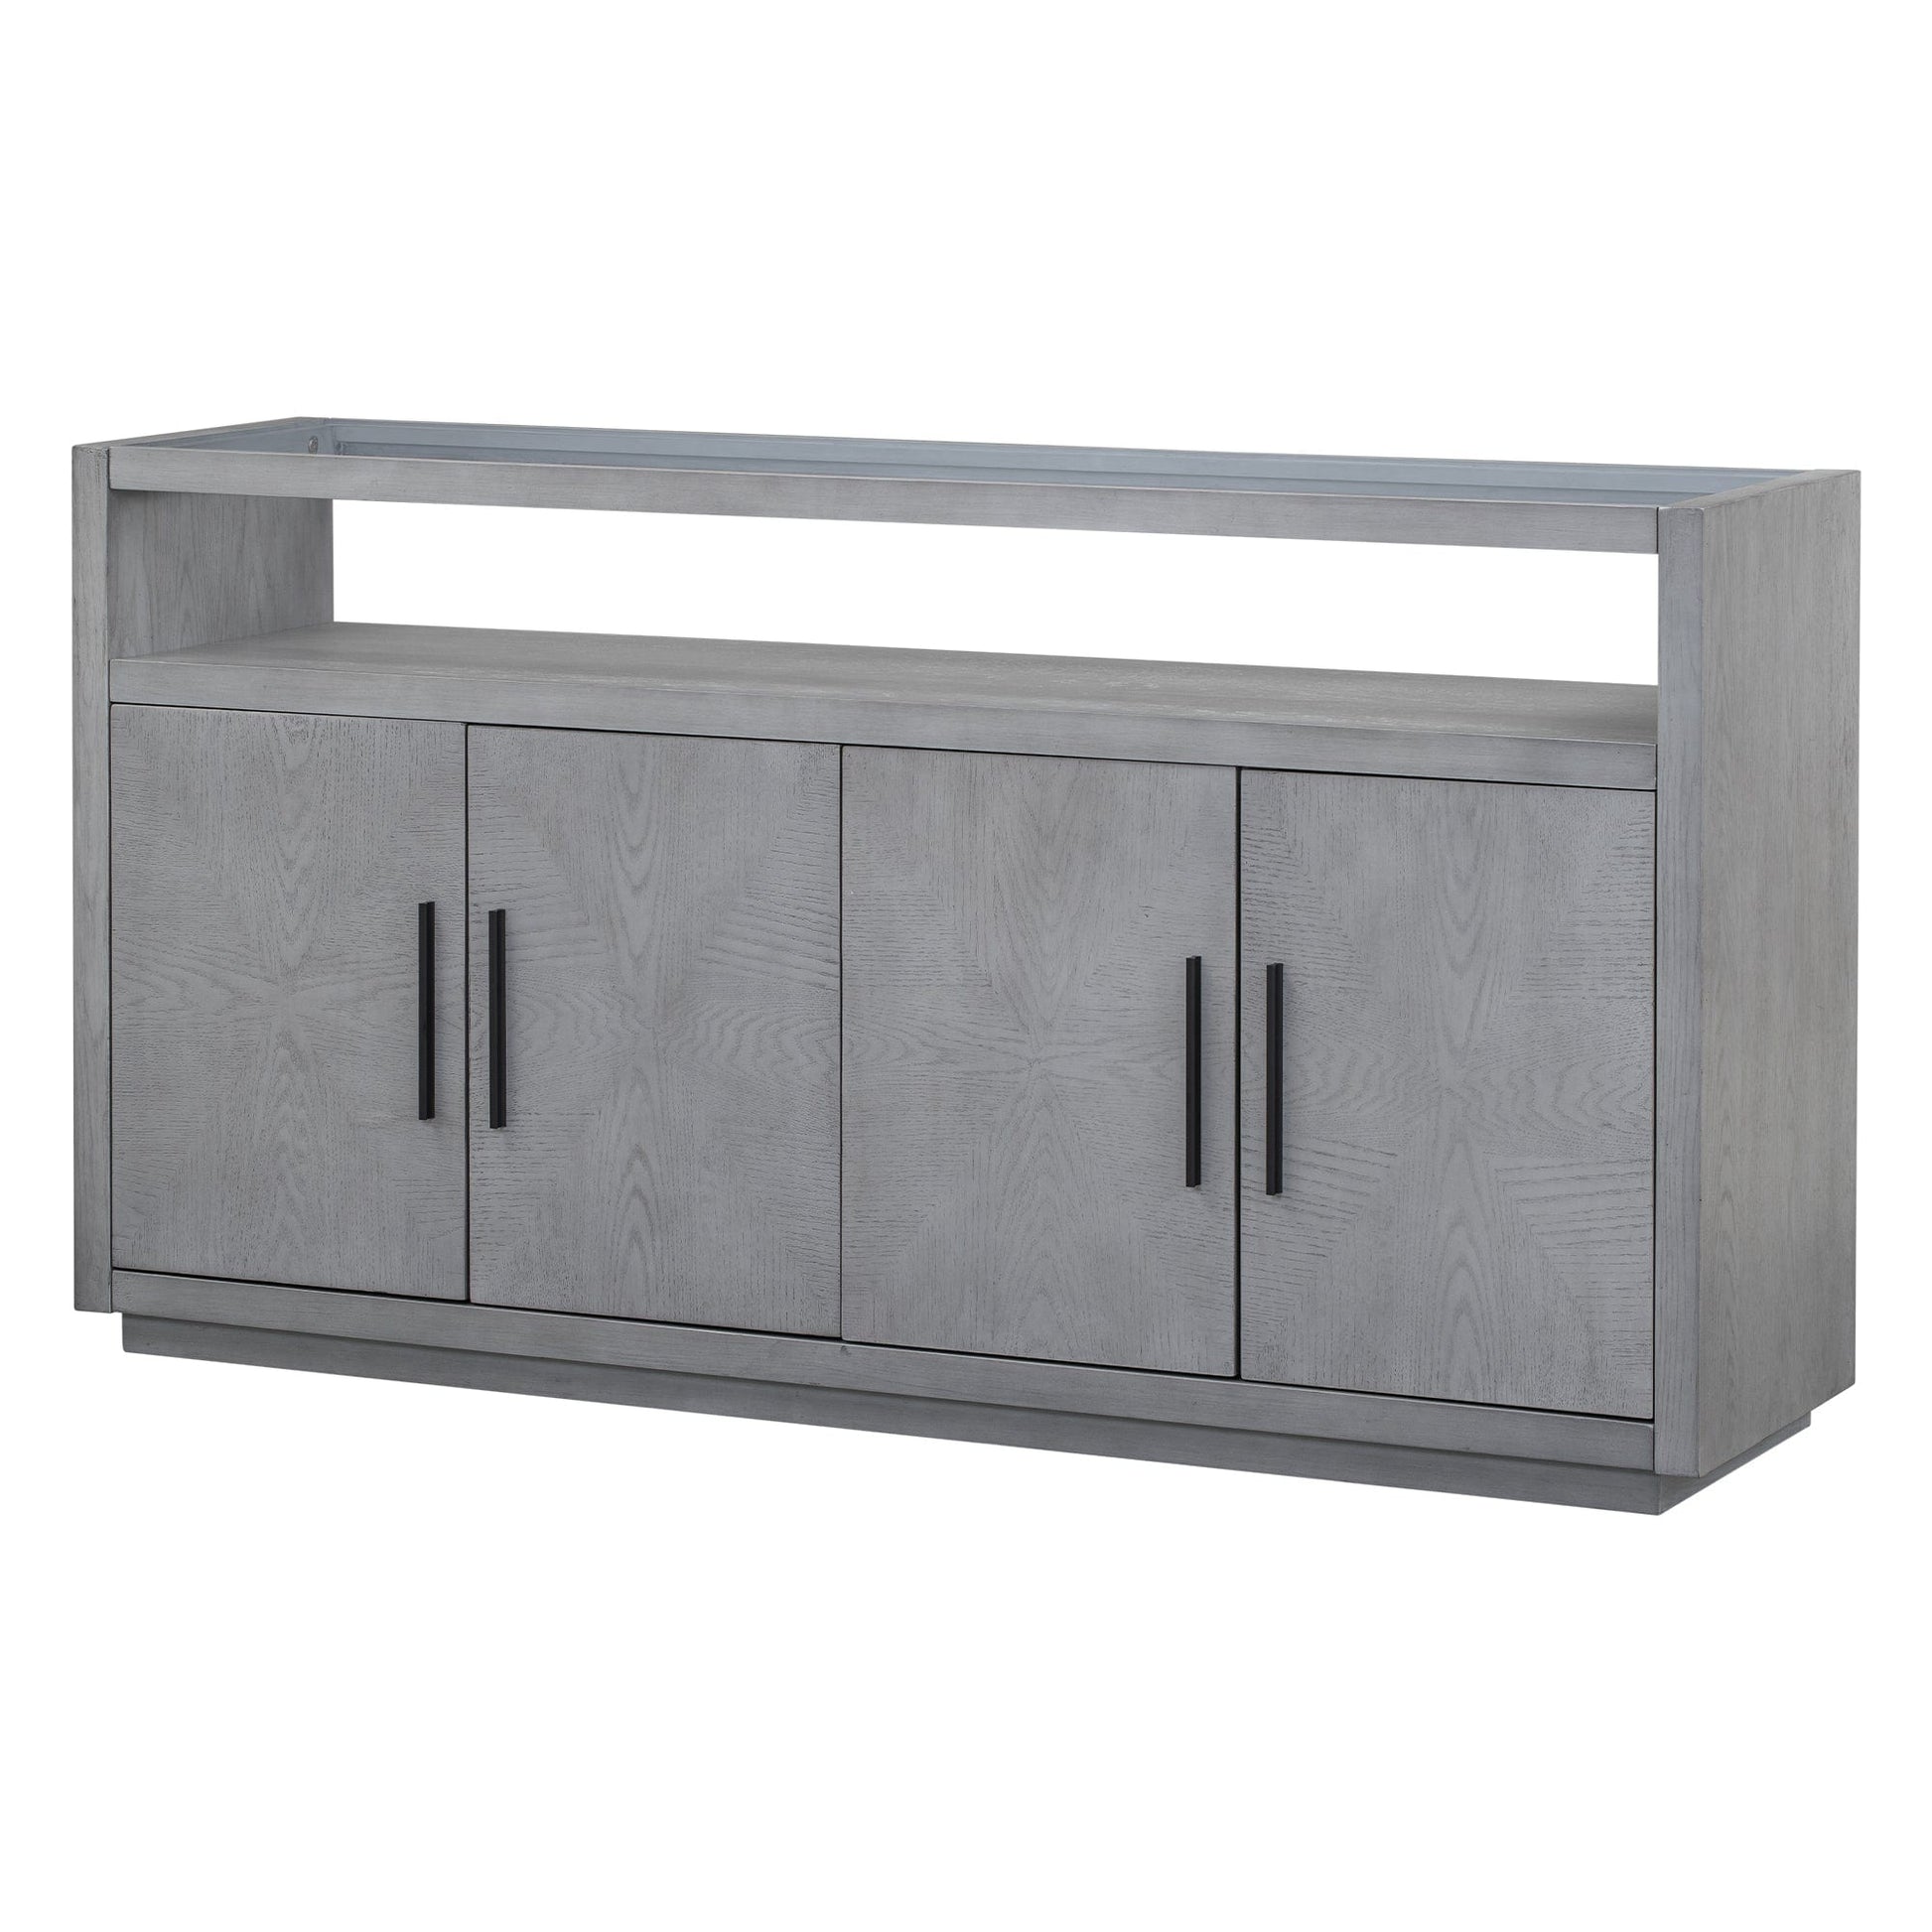 1st Choice Furniture Direct Sideboard 1st Choice Modern Multi-Functional Sideboard Wooden & Metal Cabinet